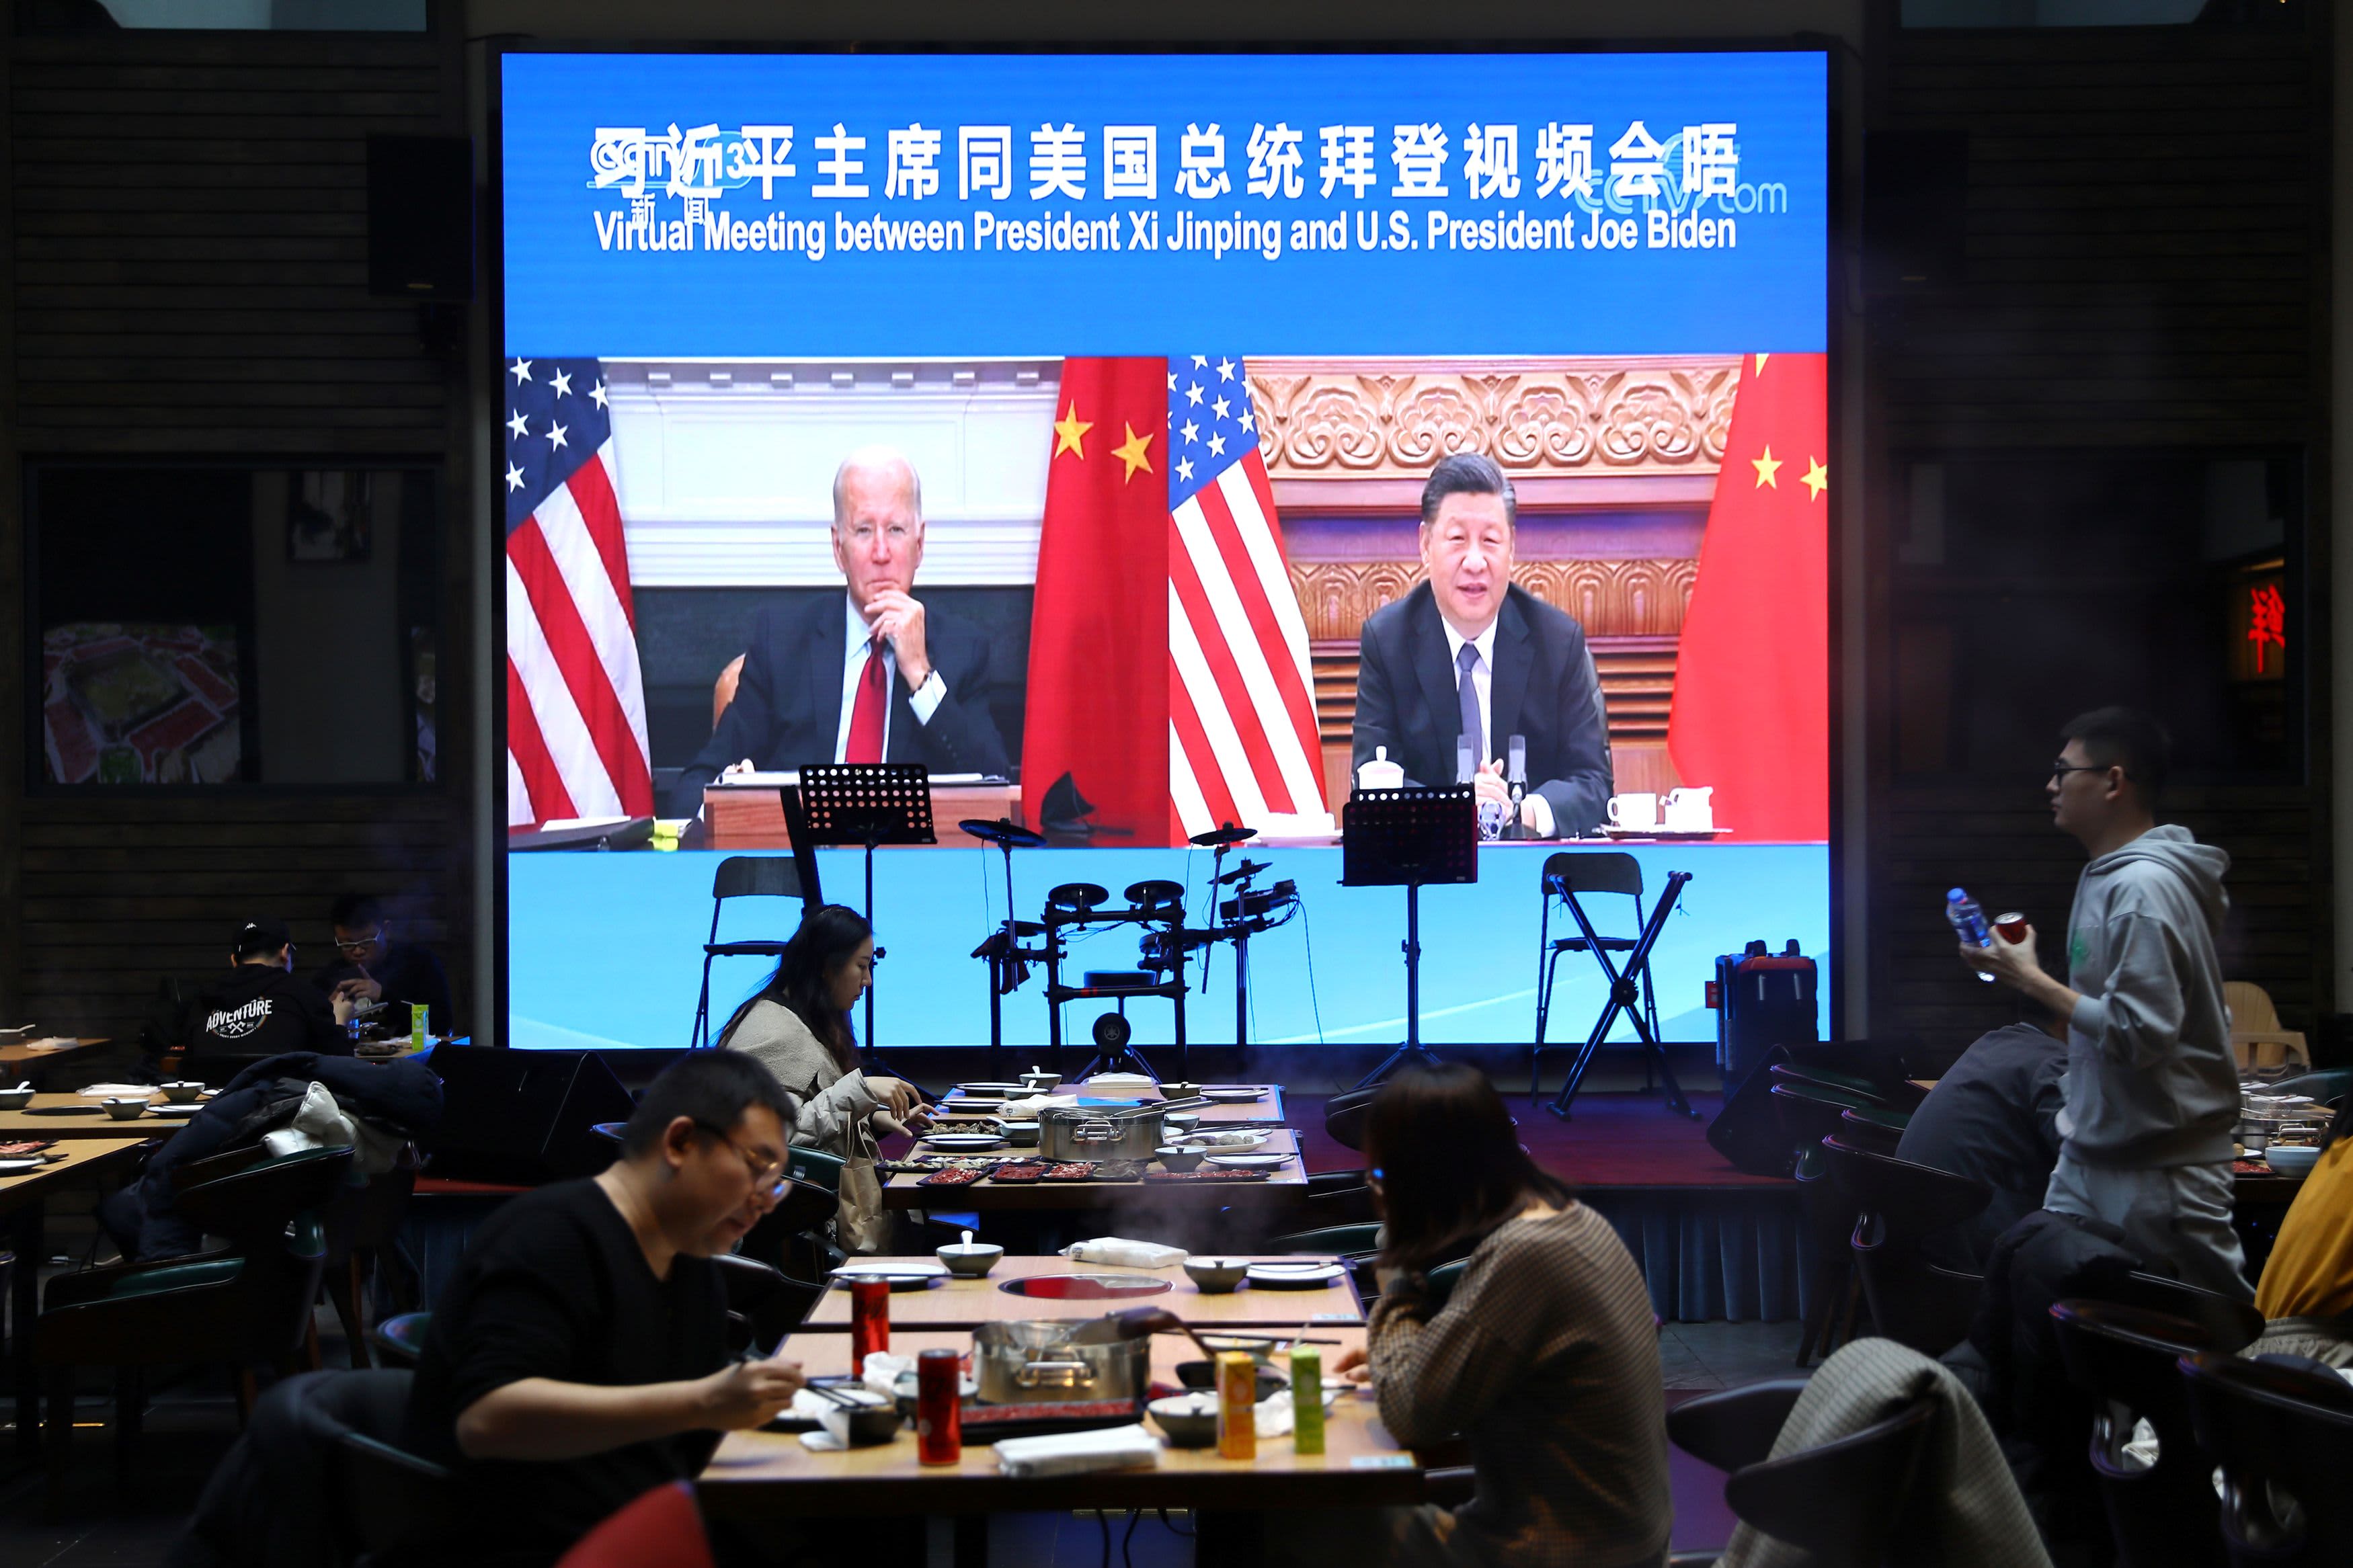 Biden's call with Xi Jinping will focus on areas of U.S.-China cooperation, not just tension